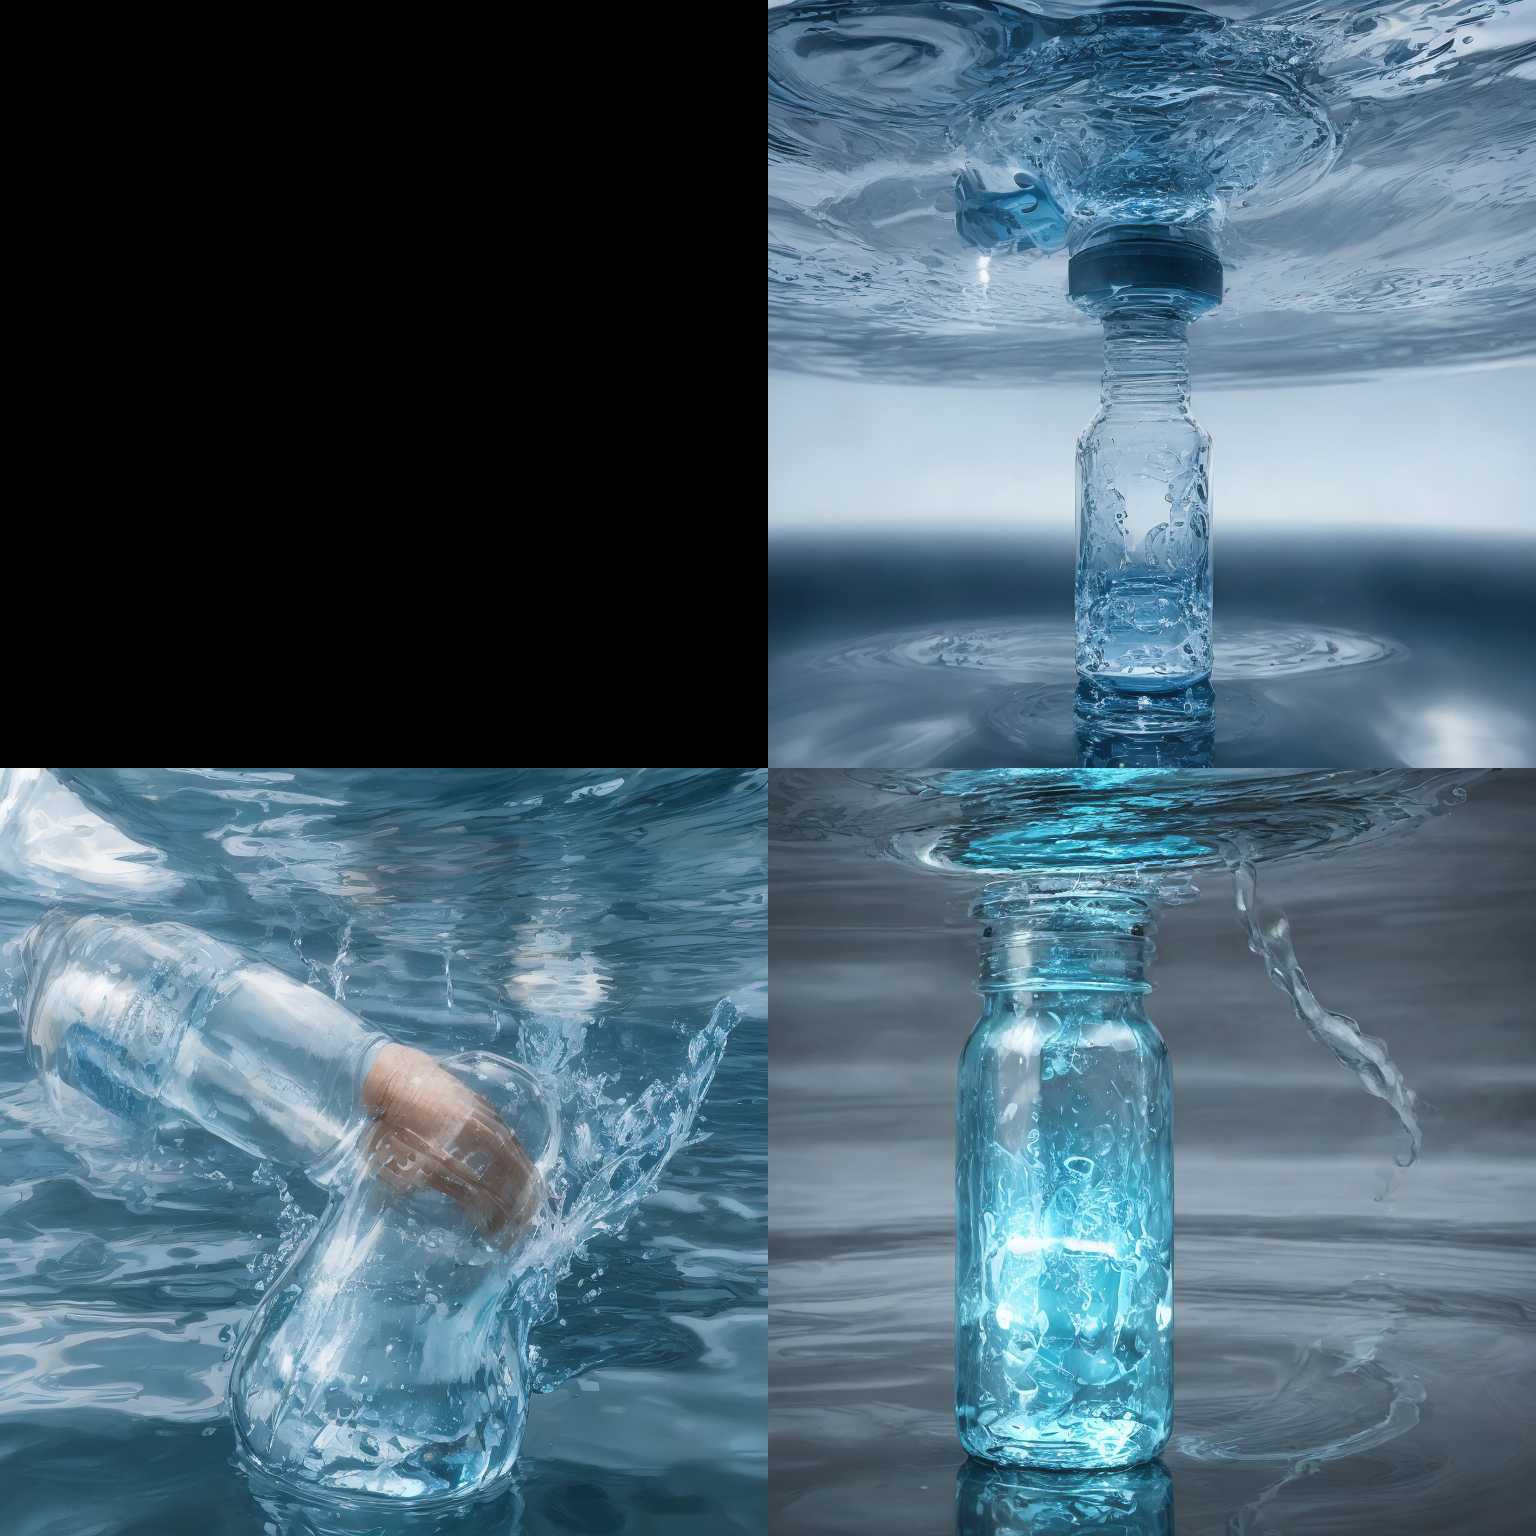 A capped water bottle turning upside down